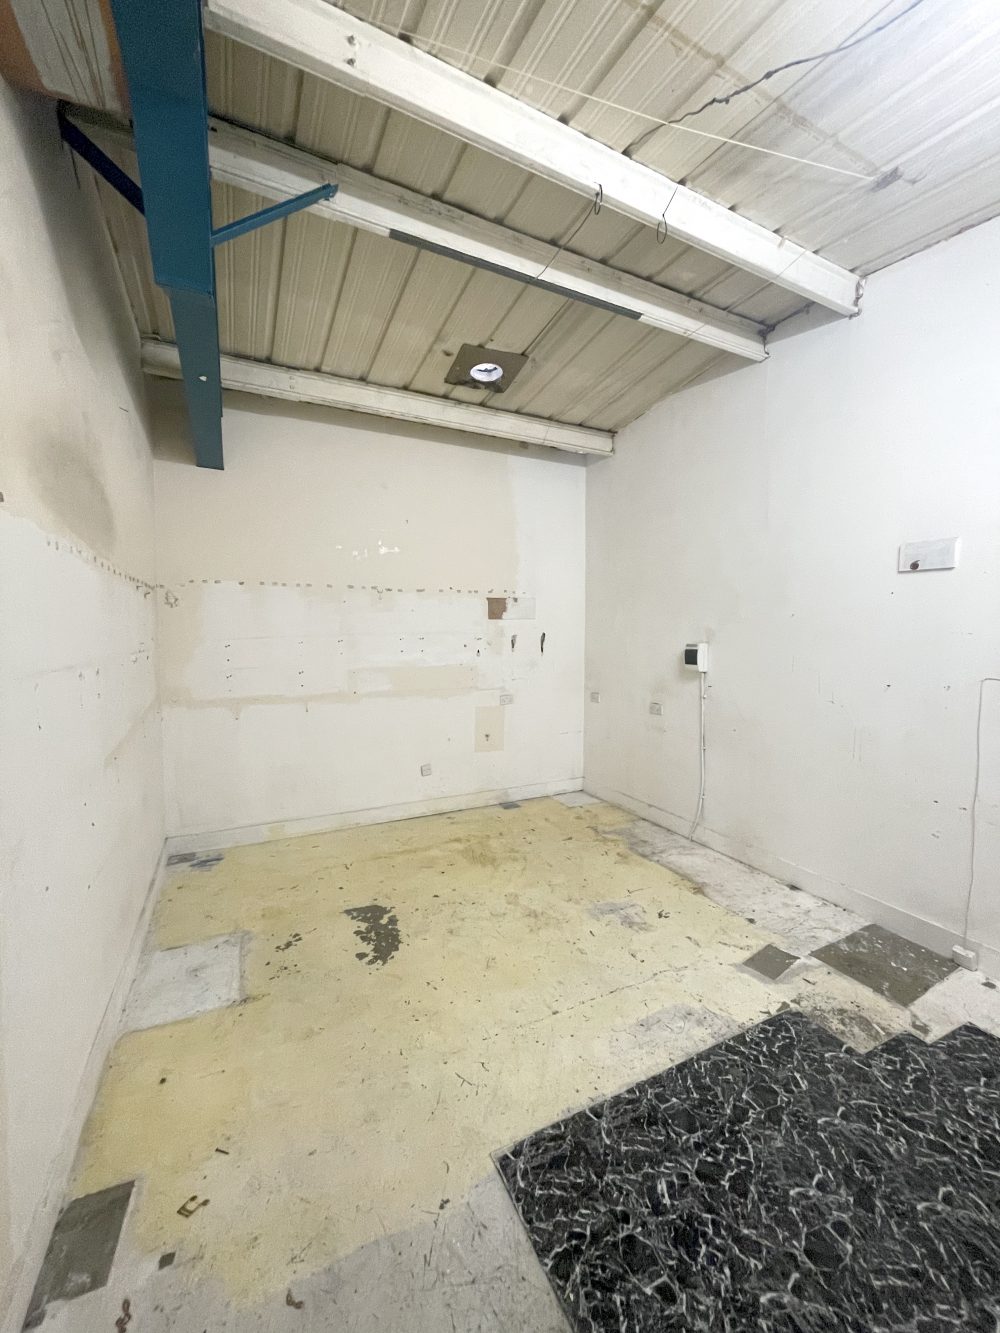 Creative Light industrial Art Studio To Rent in N16 Stoke Newington Shelford Place Pic2